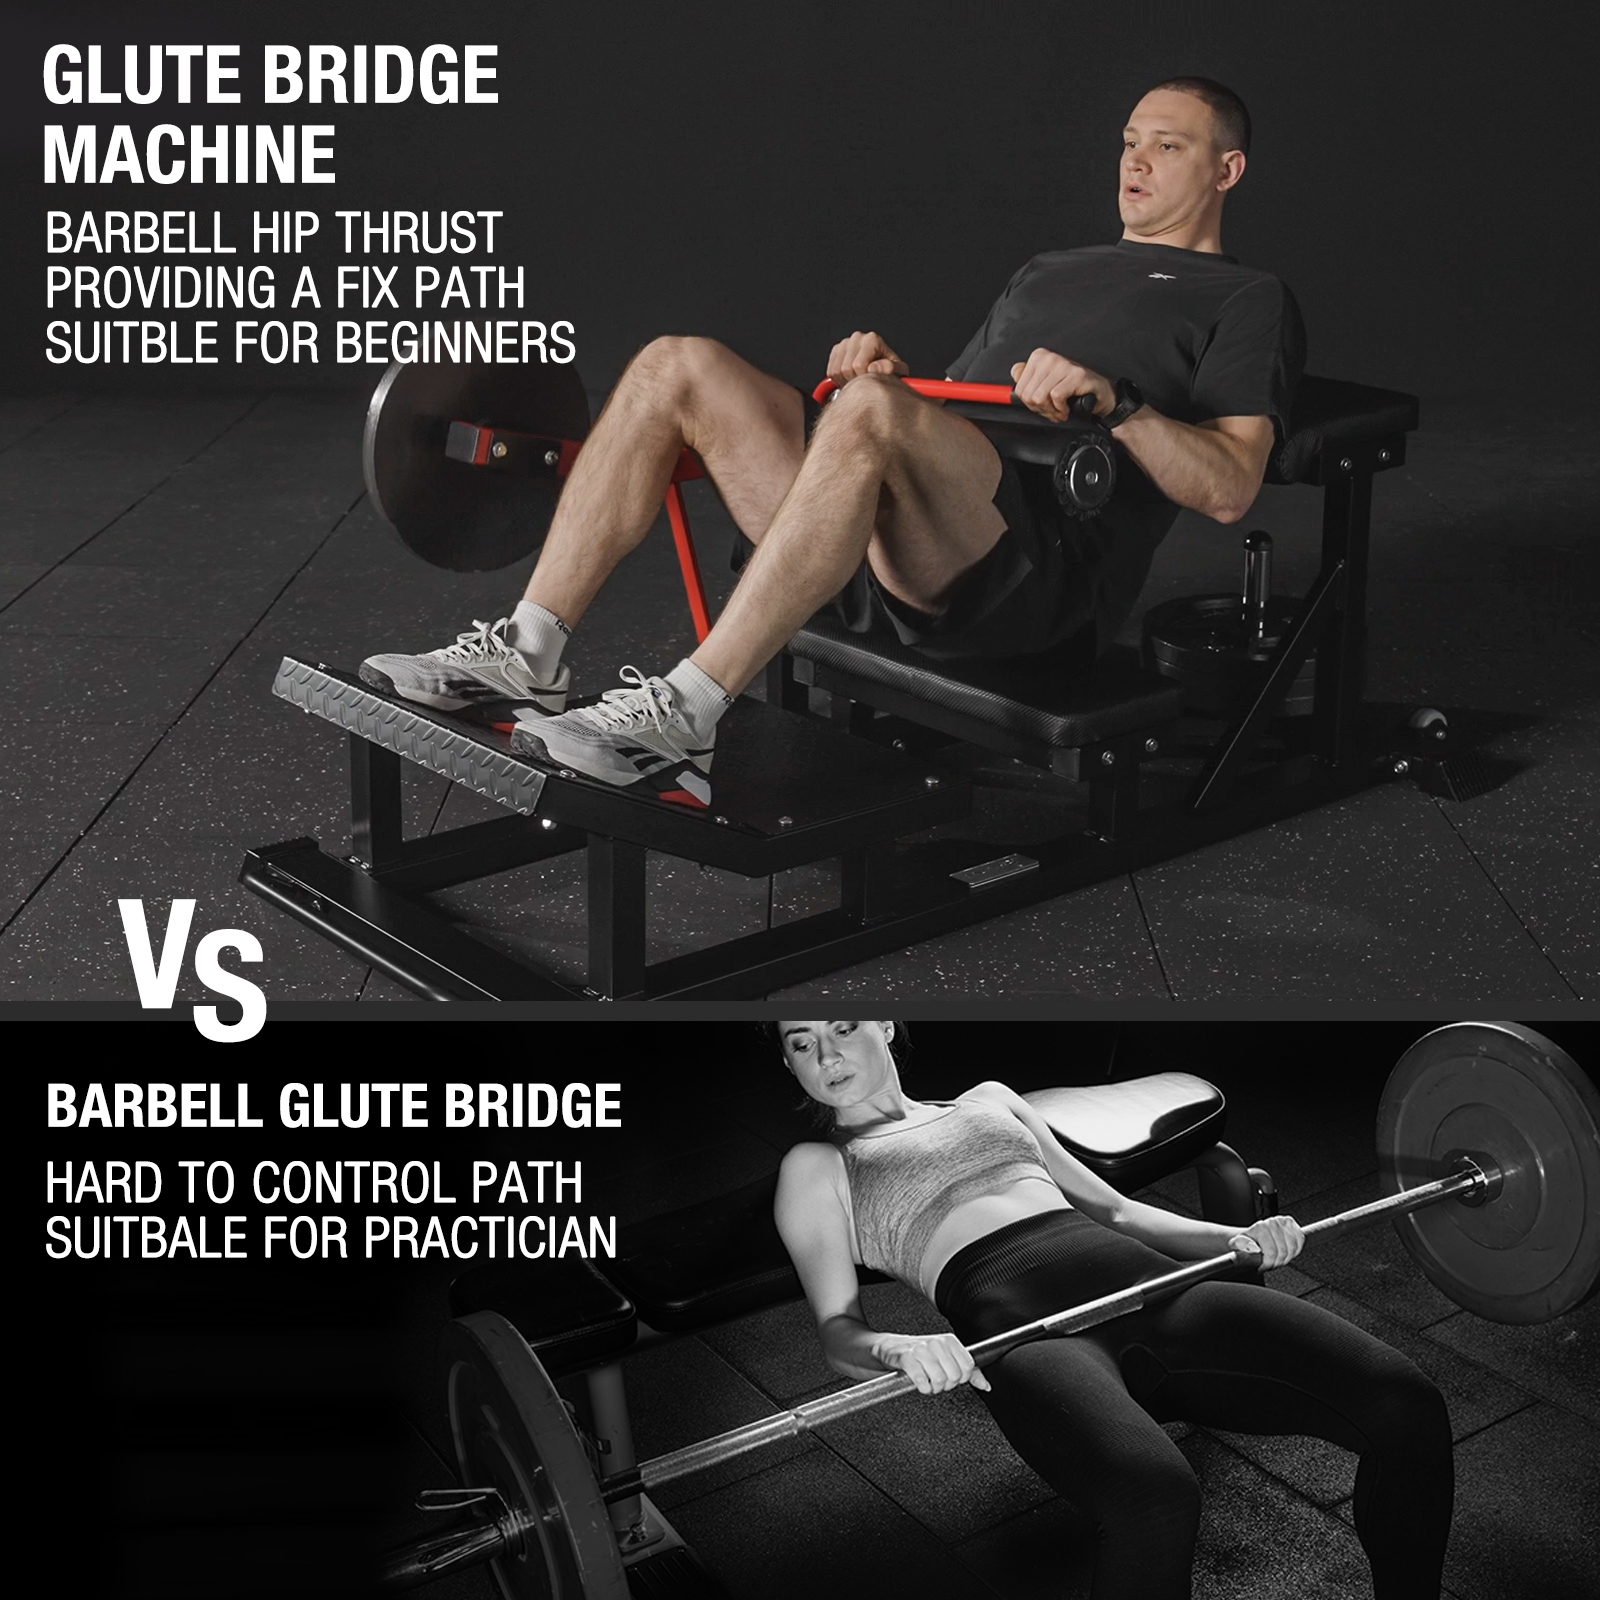 syedee Glute Bridge Machine, Heavy Duty Plate-Loaded Hip Thrust Machine, Glute Drive Machine for Glute Muscles Shaping(Red), Home Gym Equipment - image 3 of 10